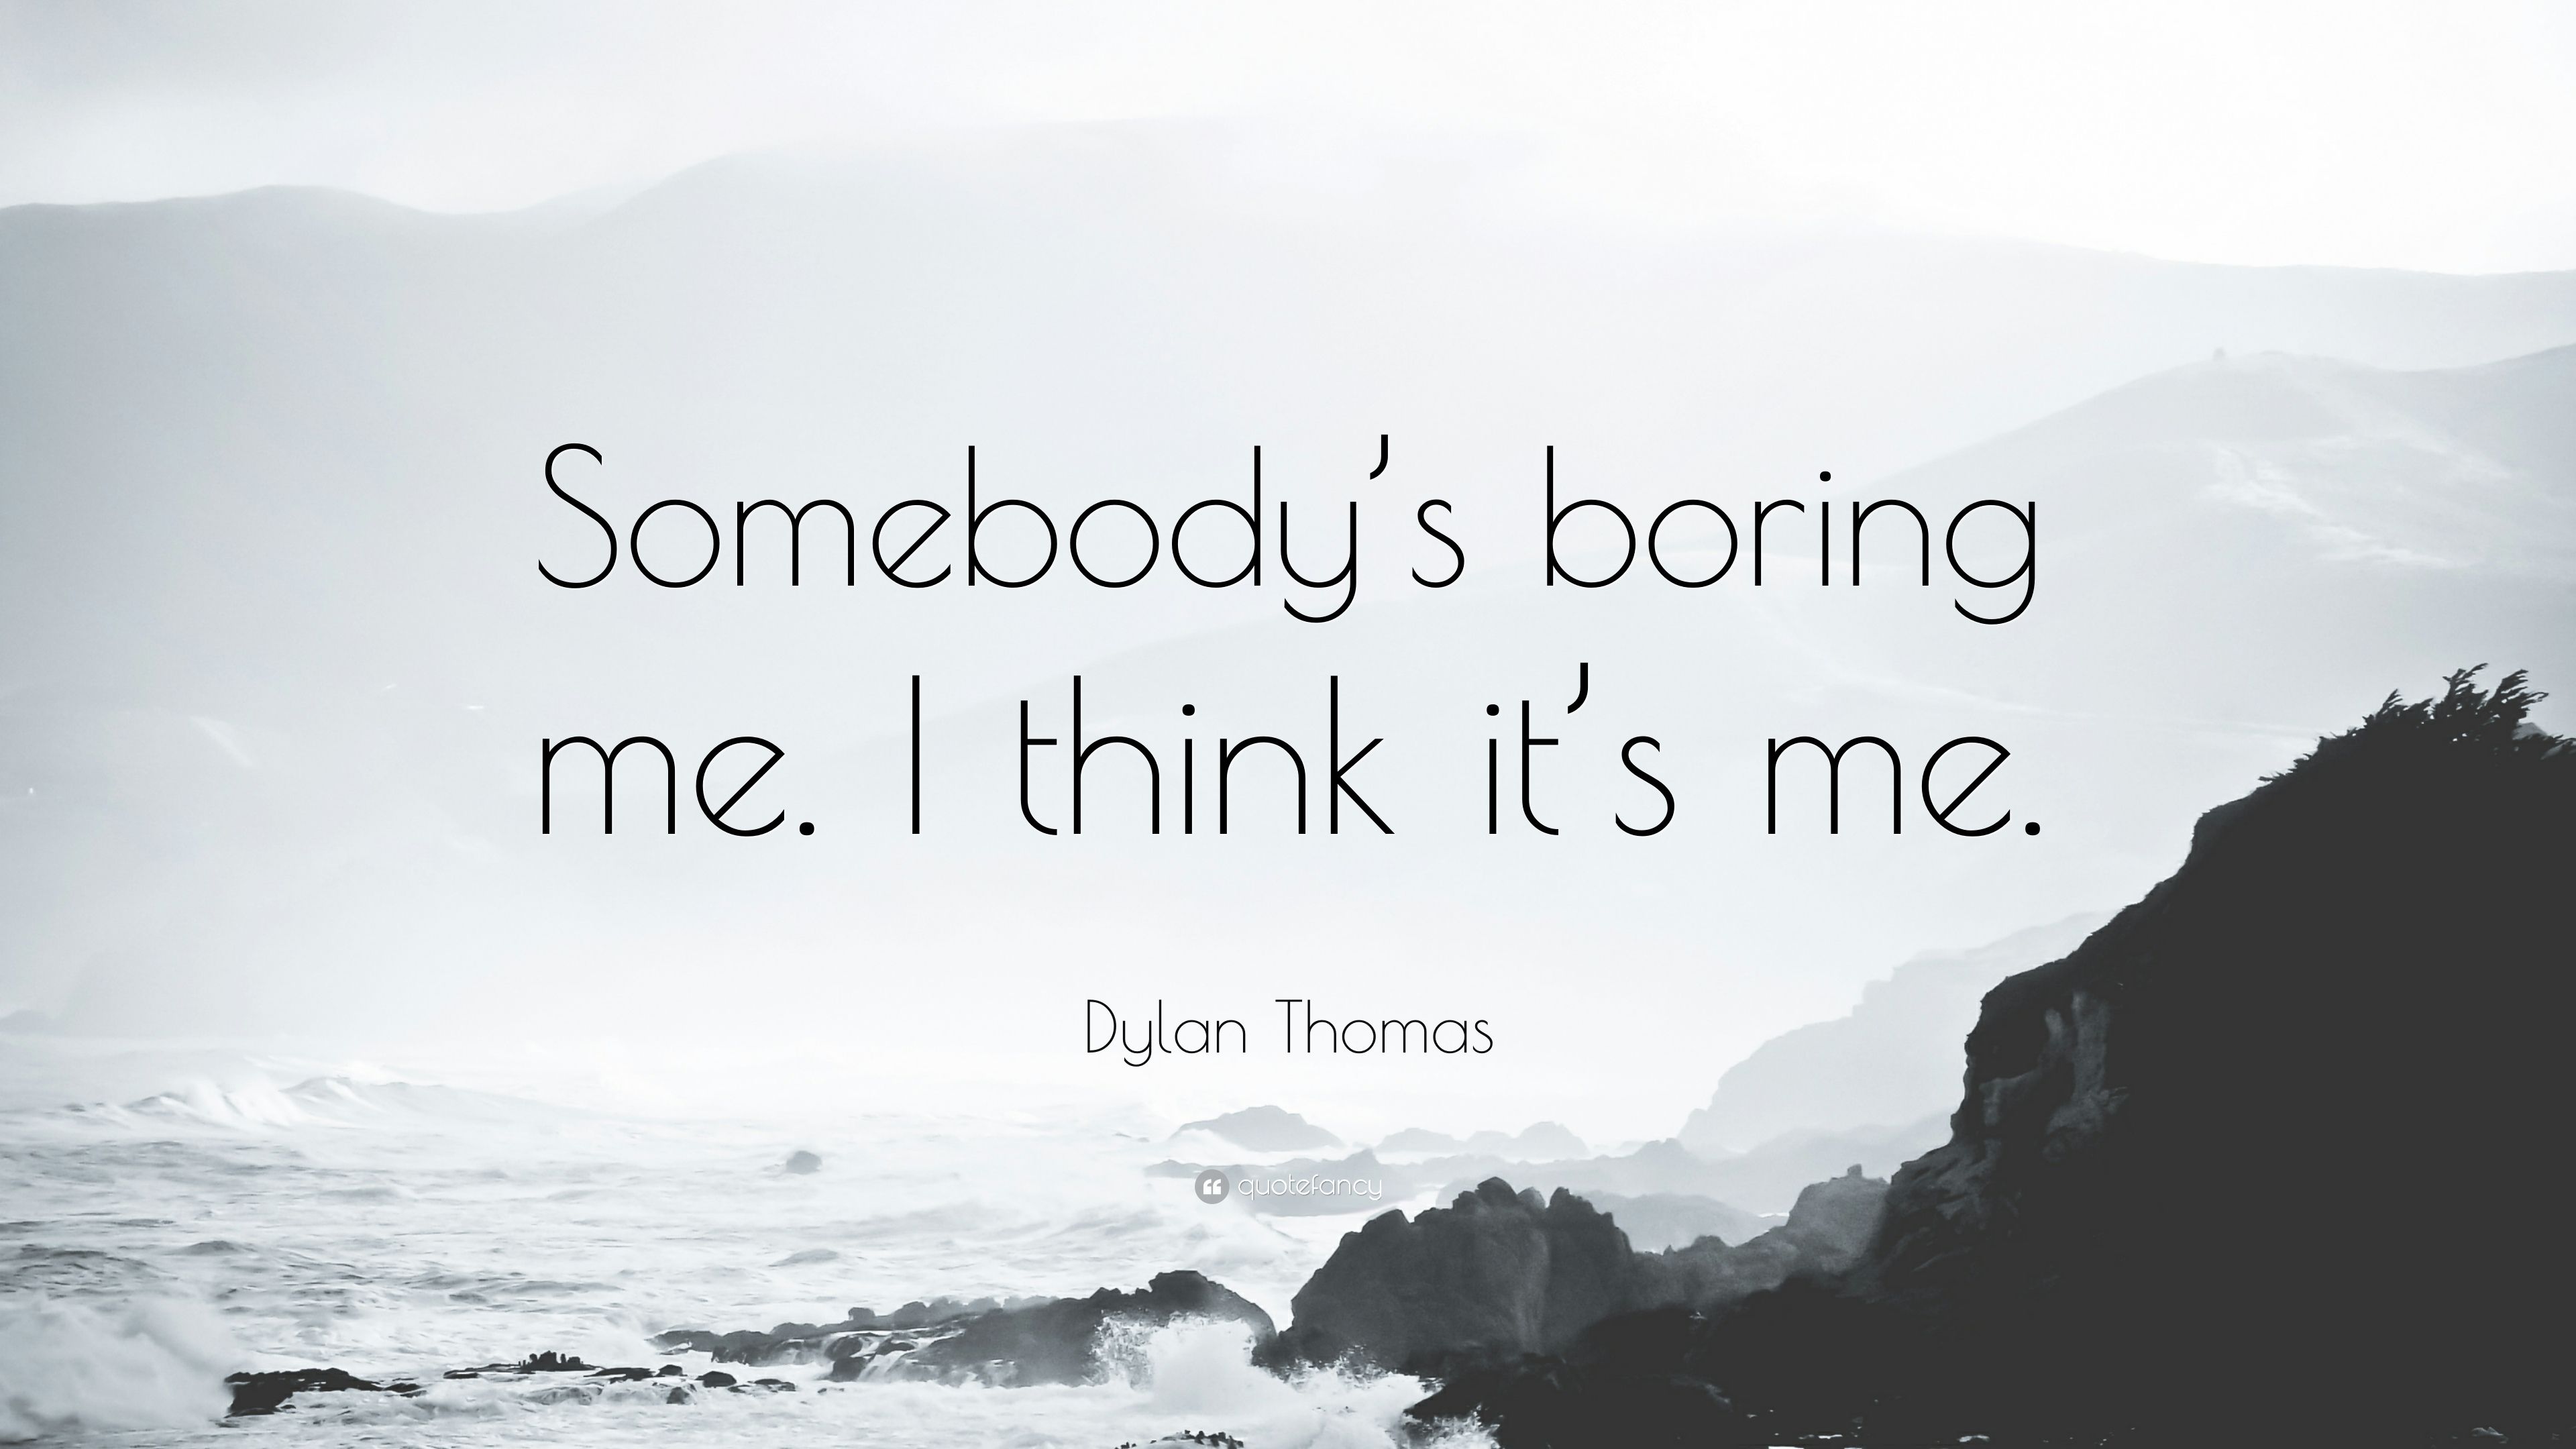 Dylan Thomas Quote: “Somebody's boring me. I think it's me.” 7